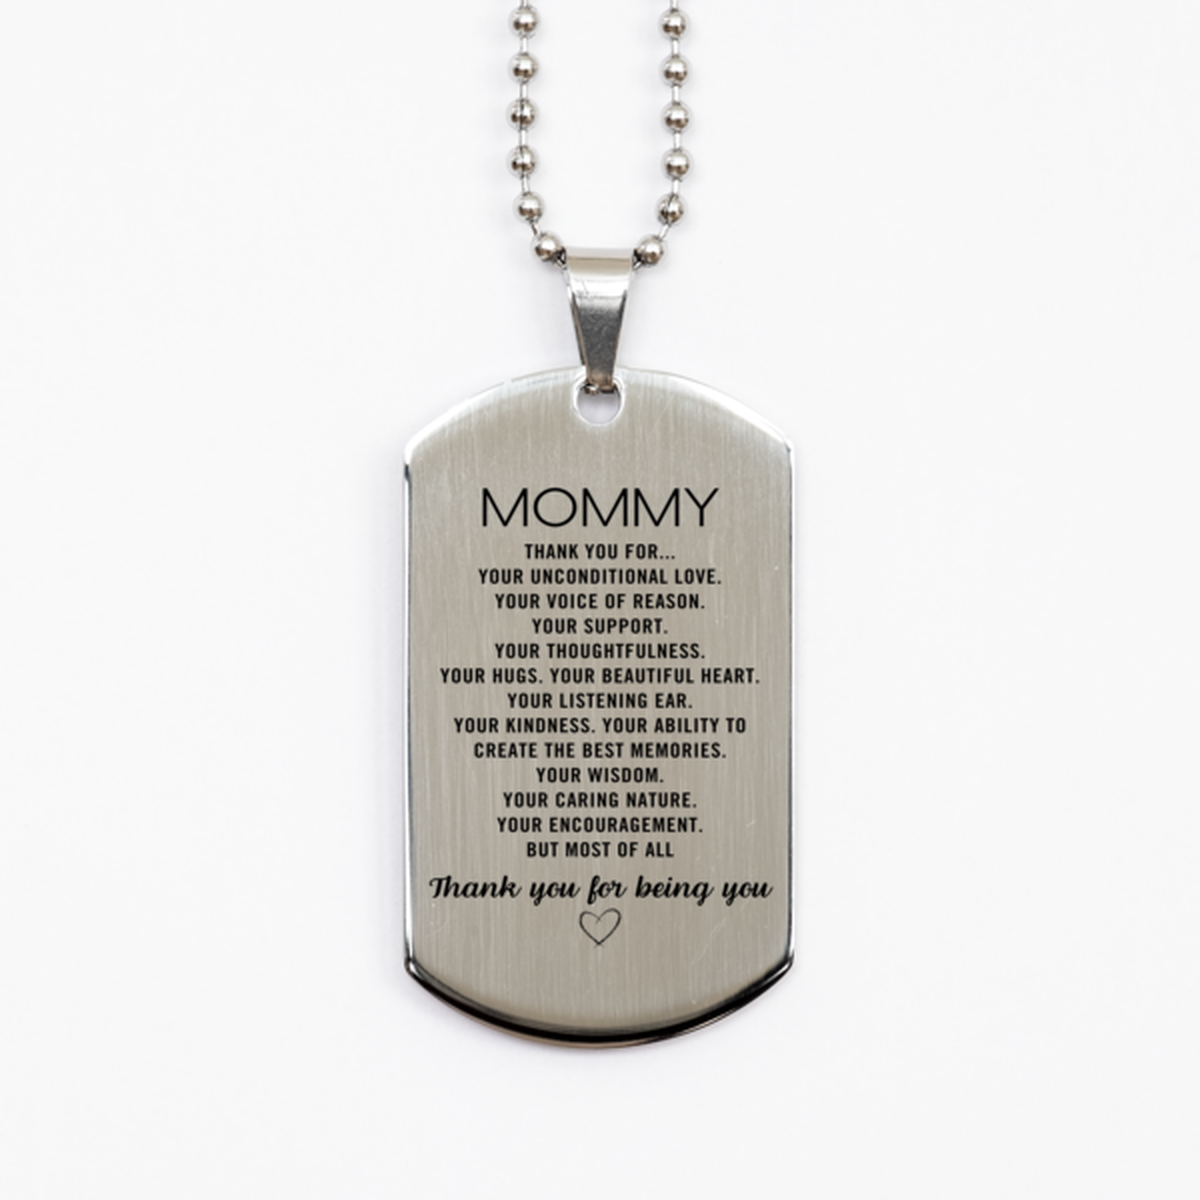 Mommy Silver Dog Tag Custom, Engraved Gifts For Mommy Christmas Graduation Birthday Gifts for Men Women Mommy Thank you for Your unconditional love